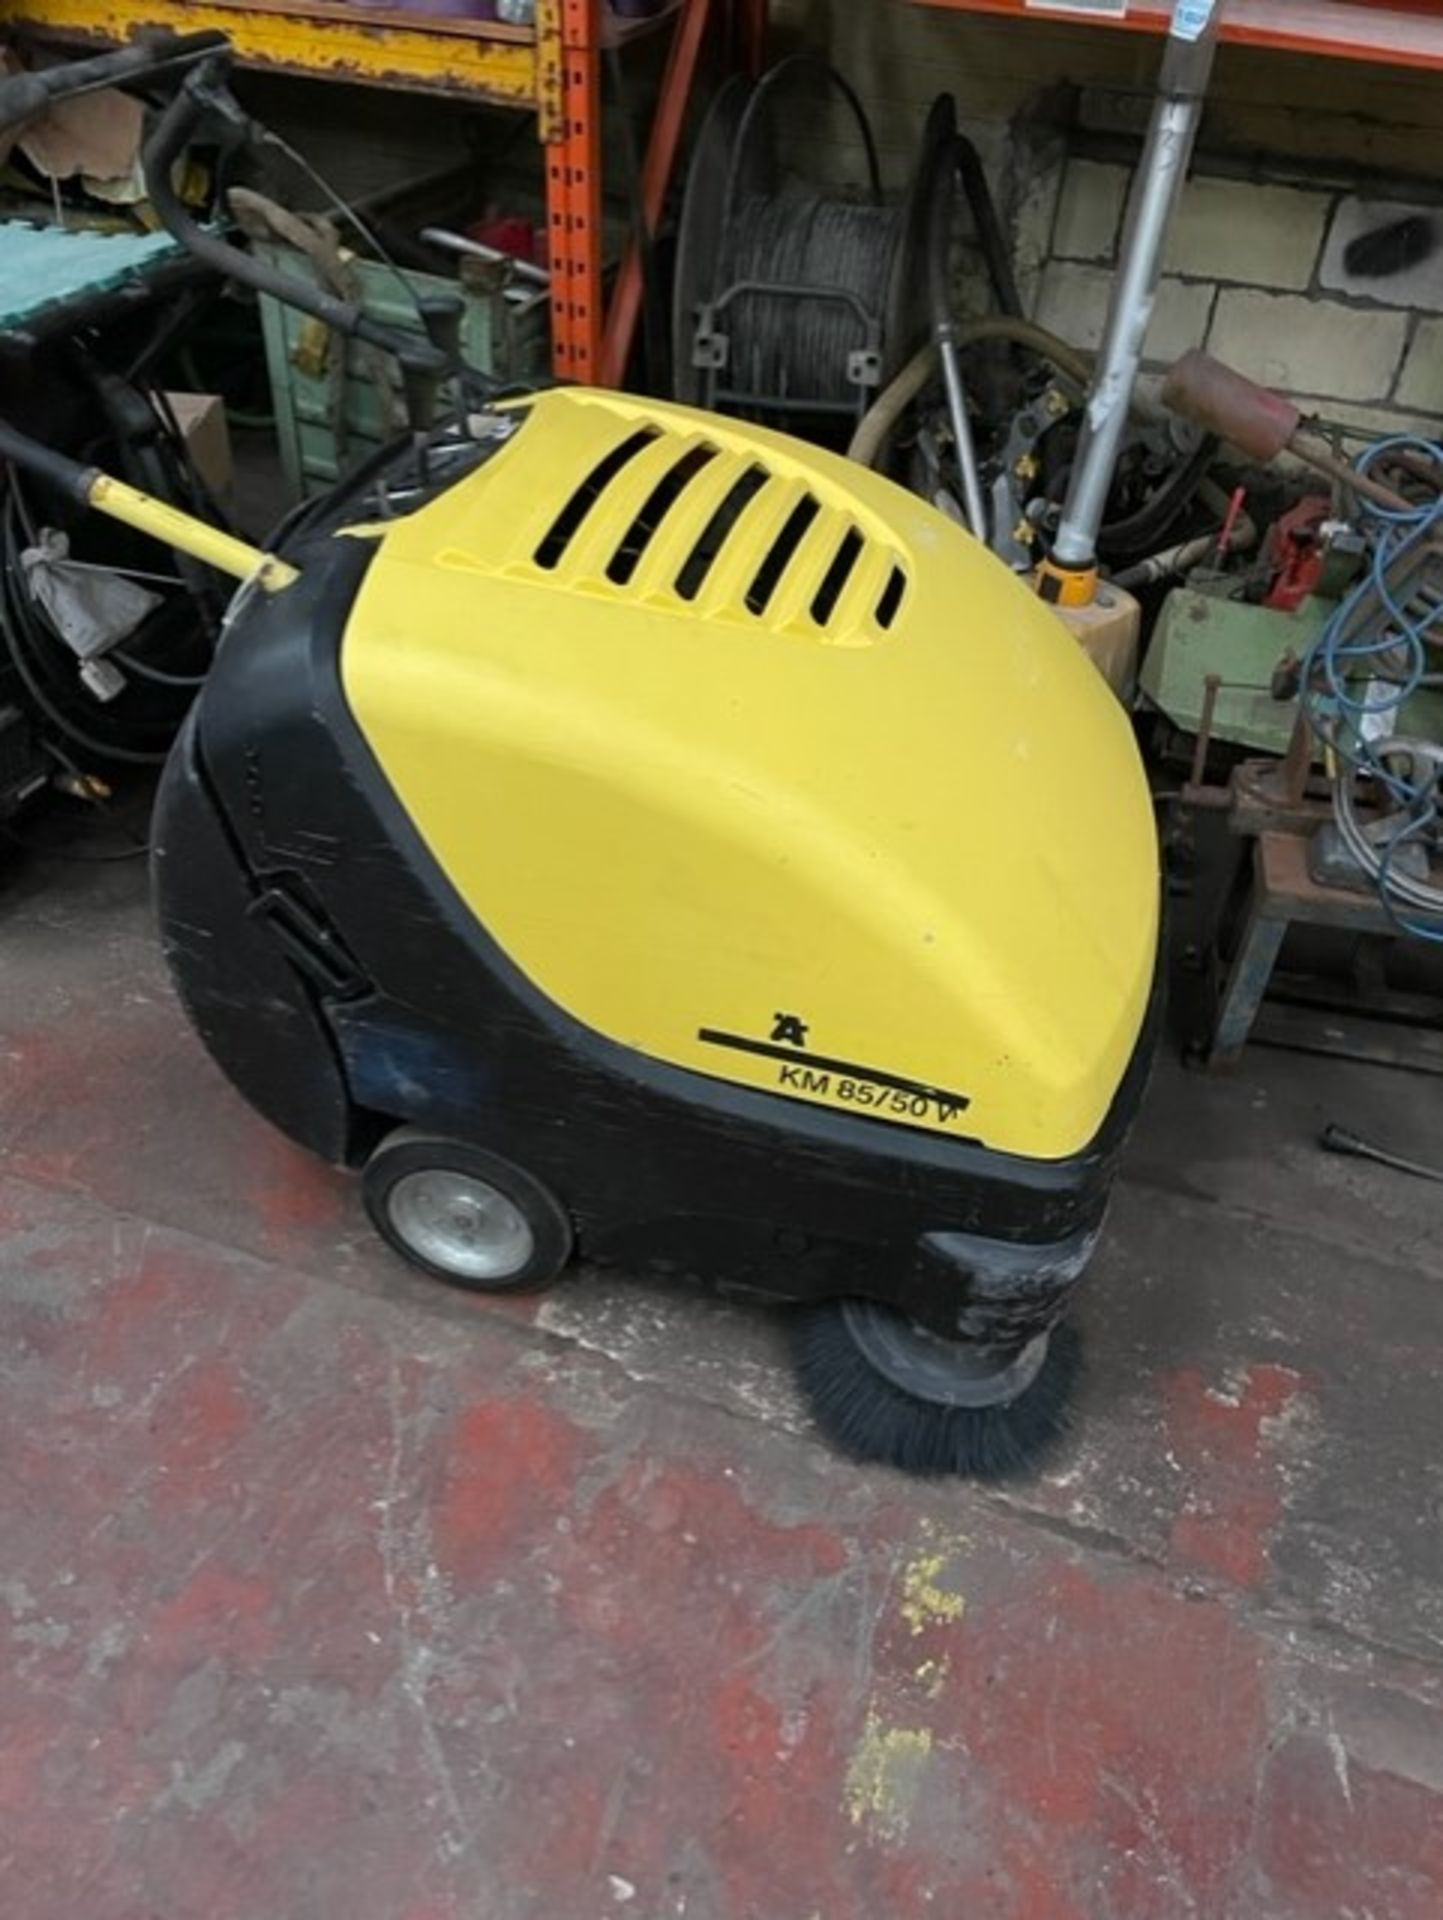 Looking tidy a karcher floor sweeper has a gx 160 engine on it  quite a bulky thing - Image 2 of 5